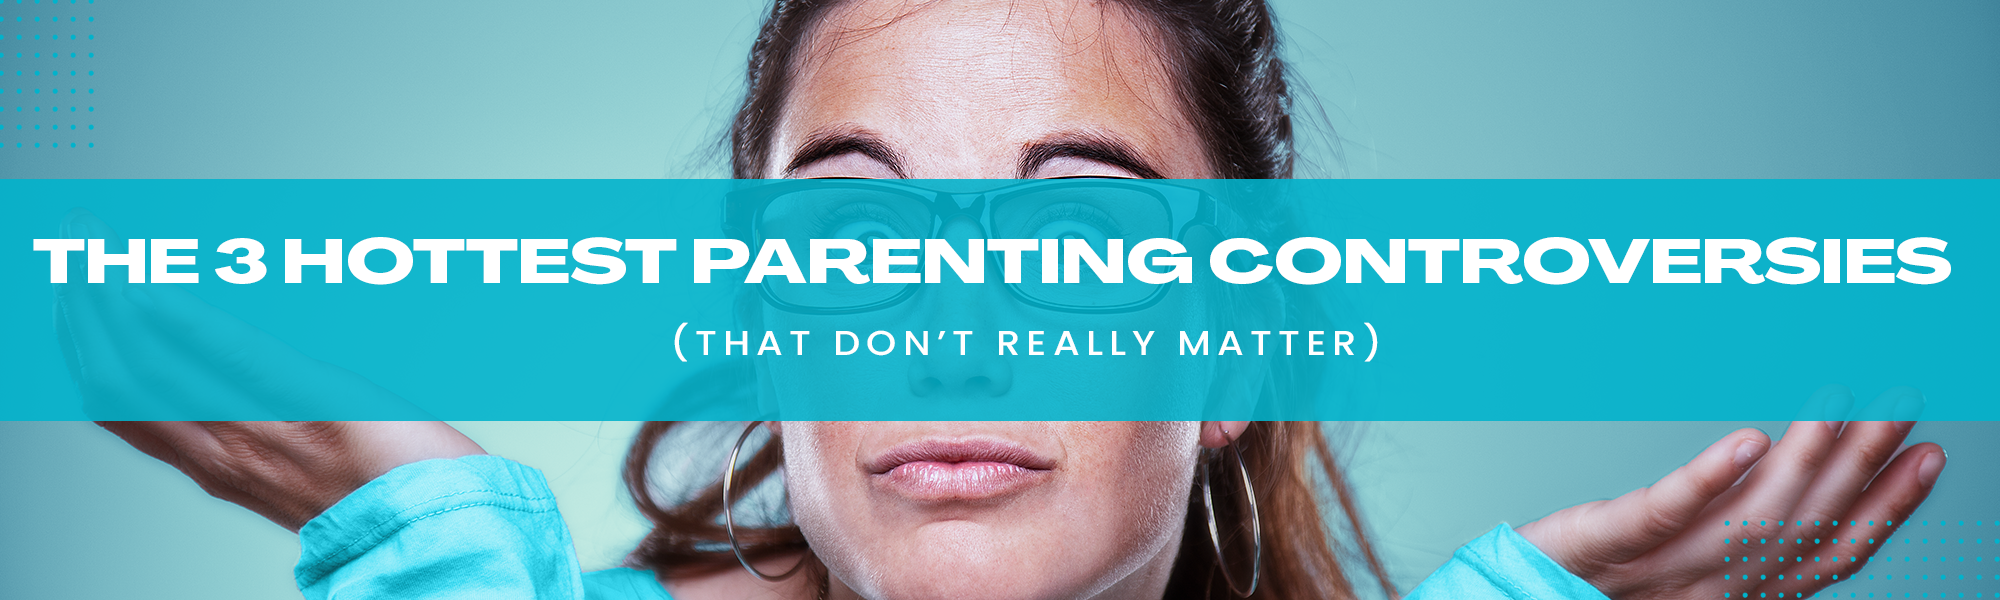 Parenting Controversy. A parent shrugs her shoulders.